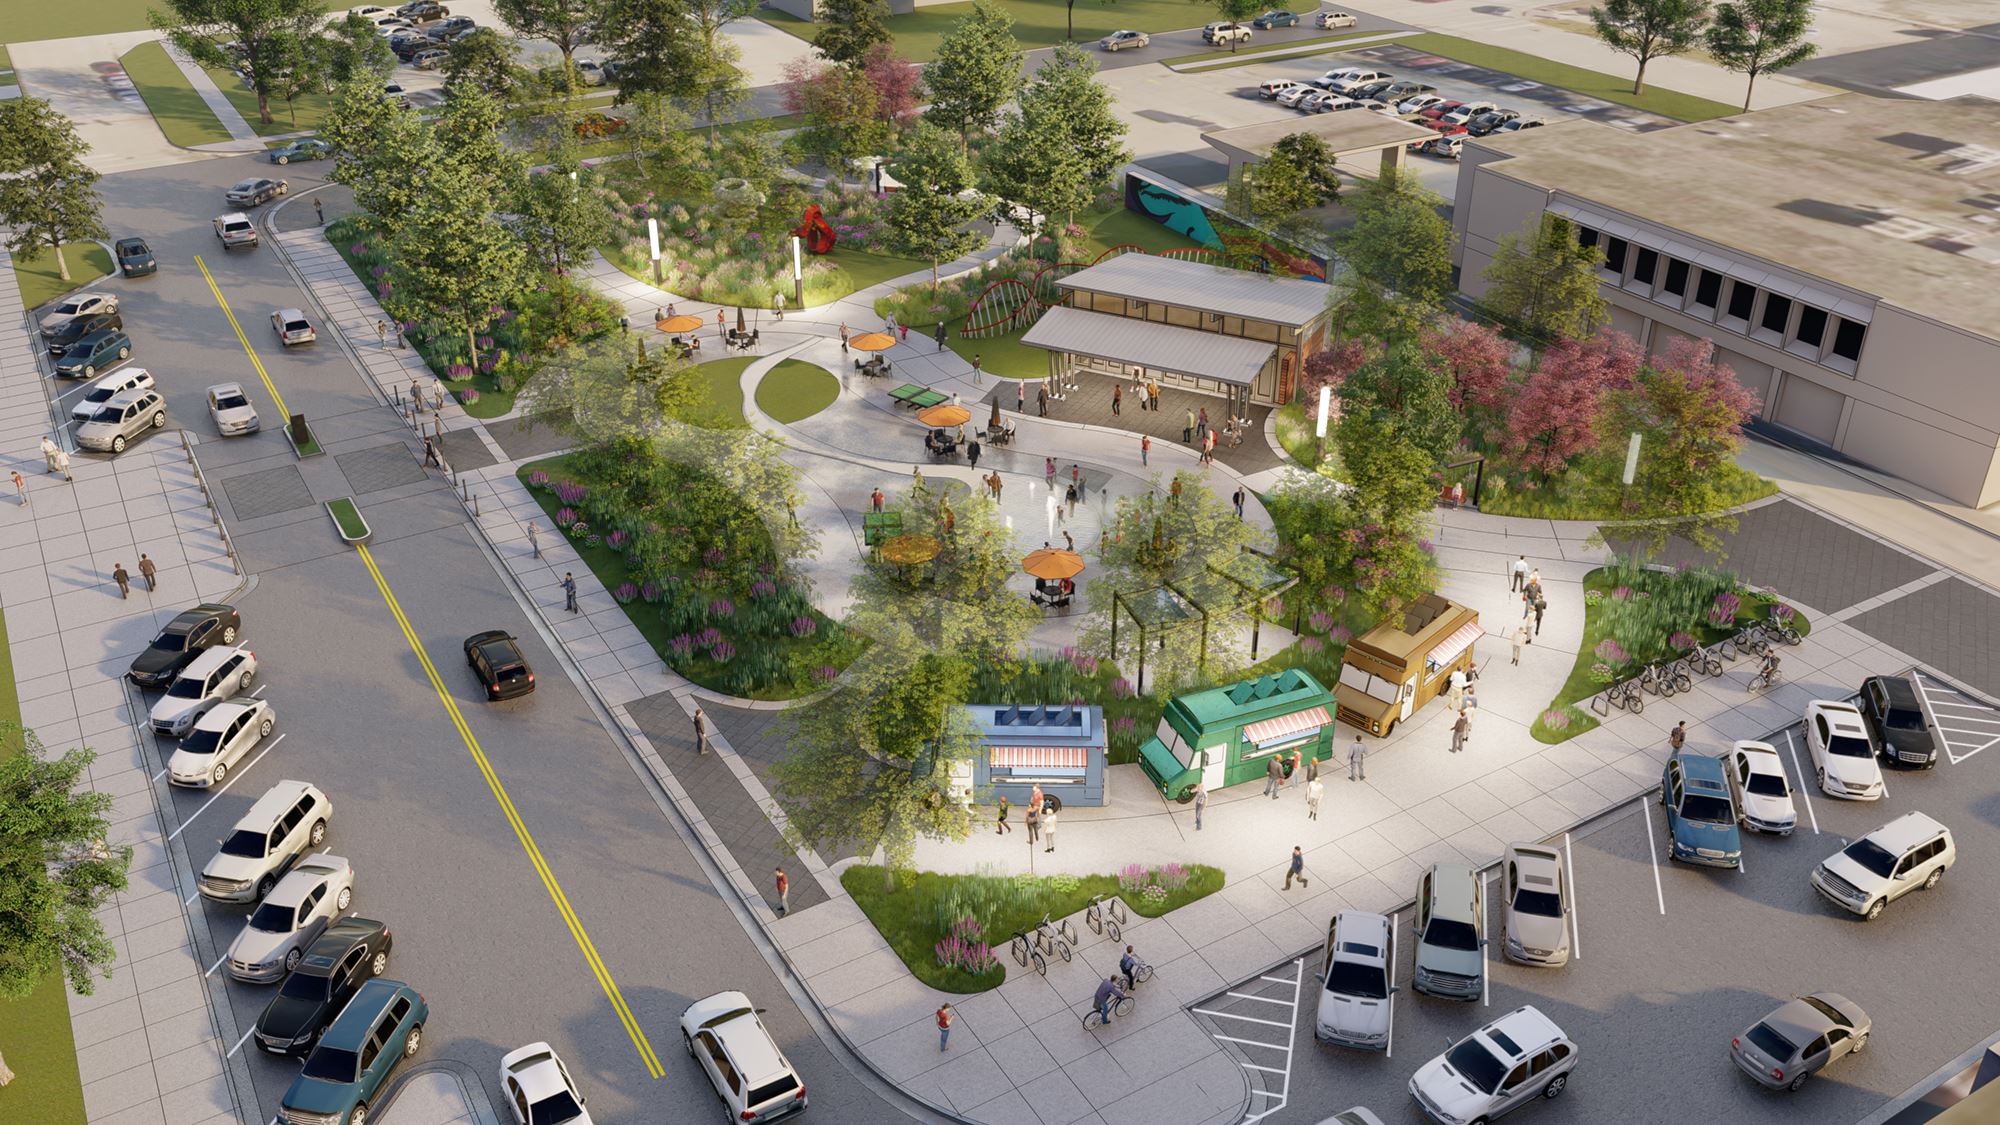 Greening the Urban Landscape, One Civic Plaza and Pocket Park at a Time